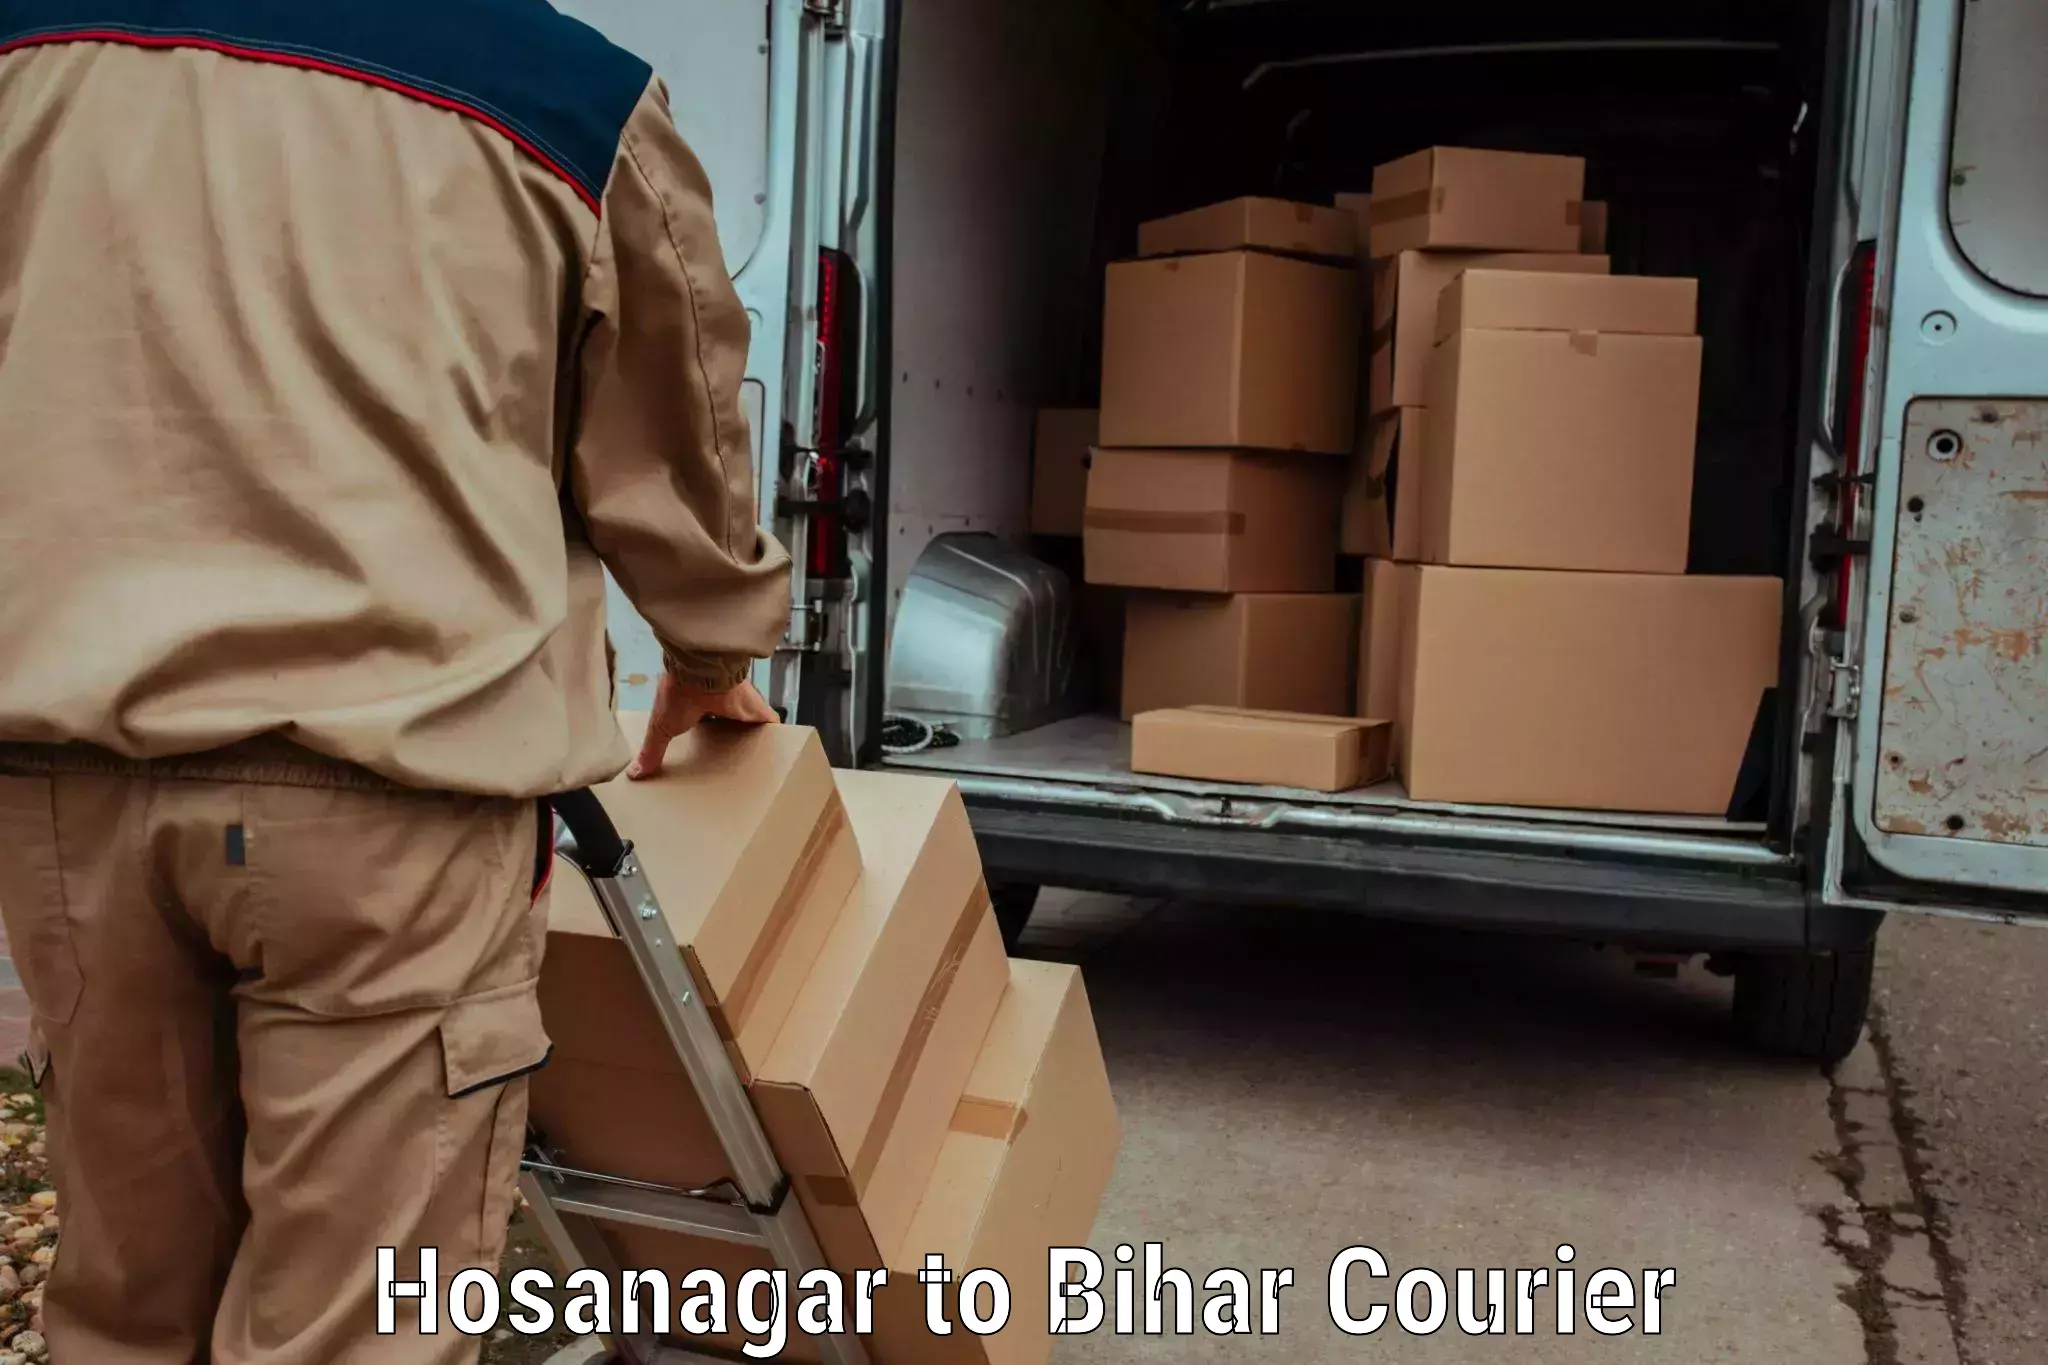 Next-day delivery options in Hosanagar to Sheikhpura